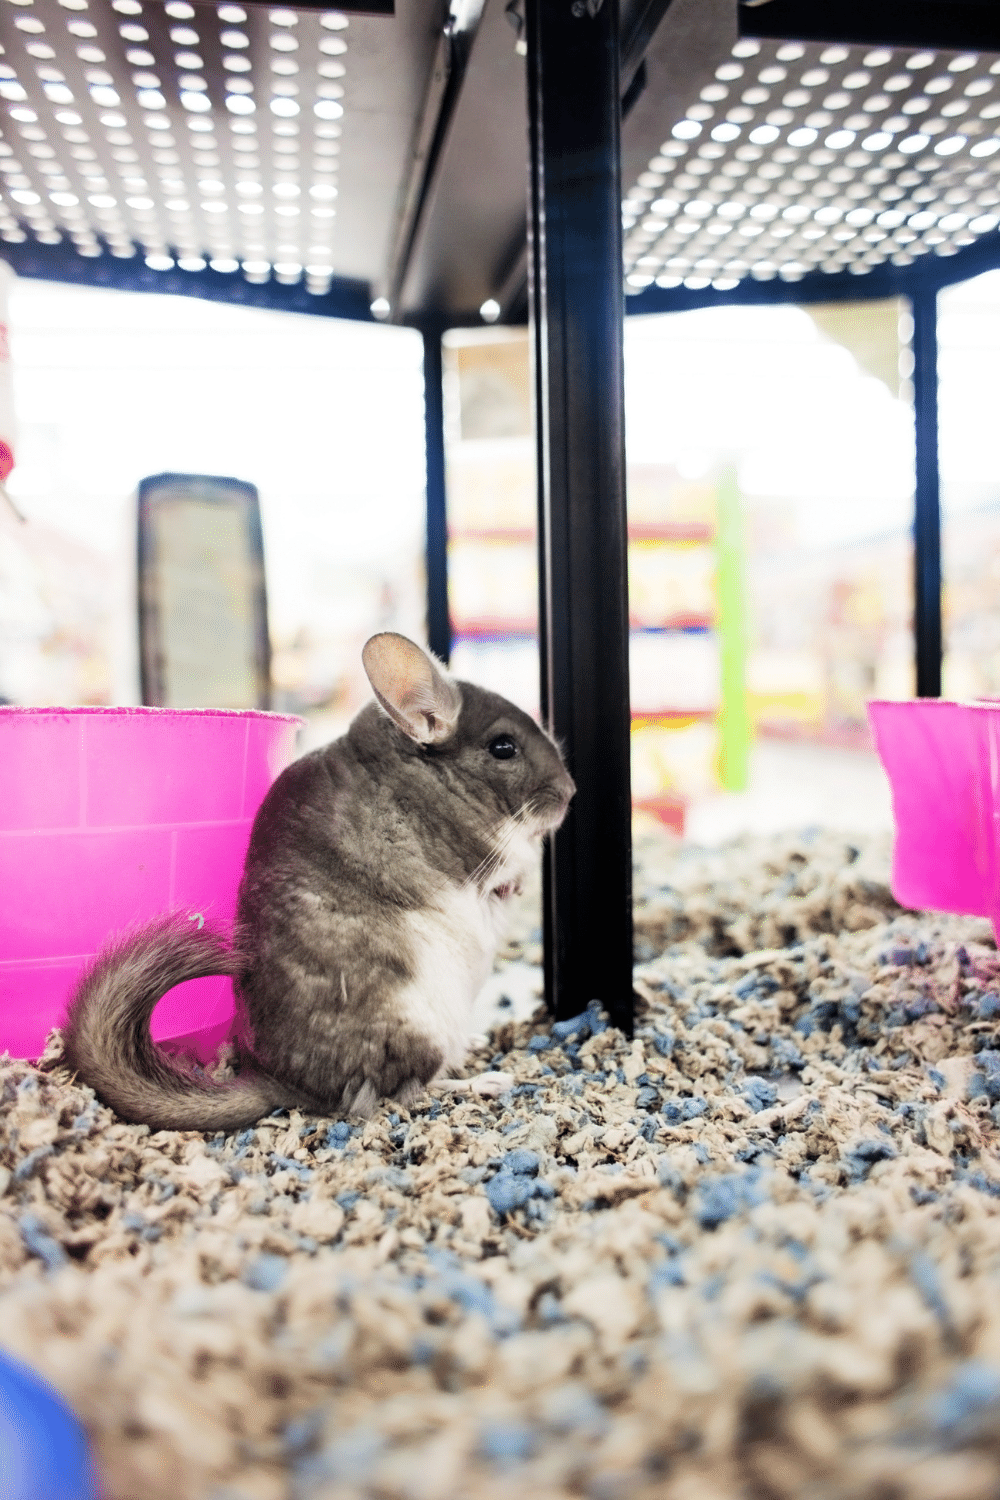 Encourage Your Chinchilla To Go In The Same Spot